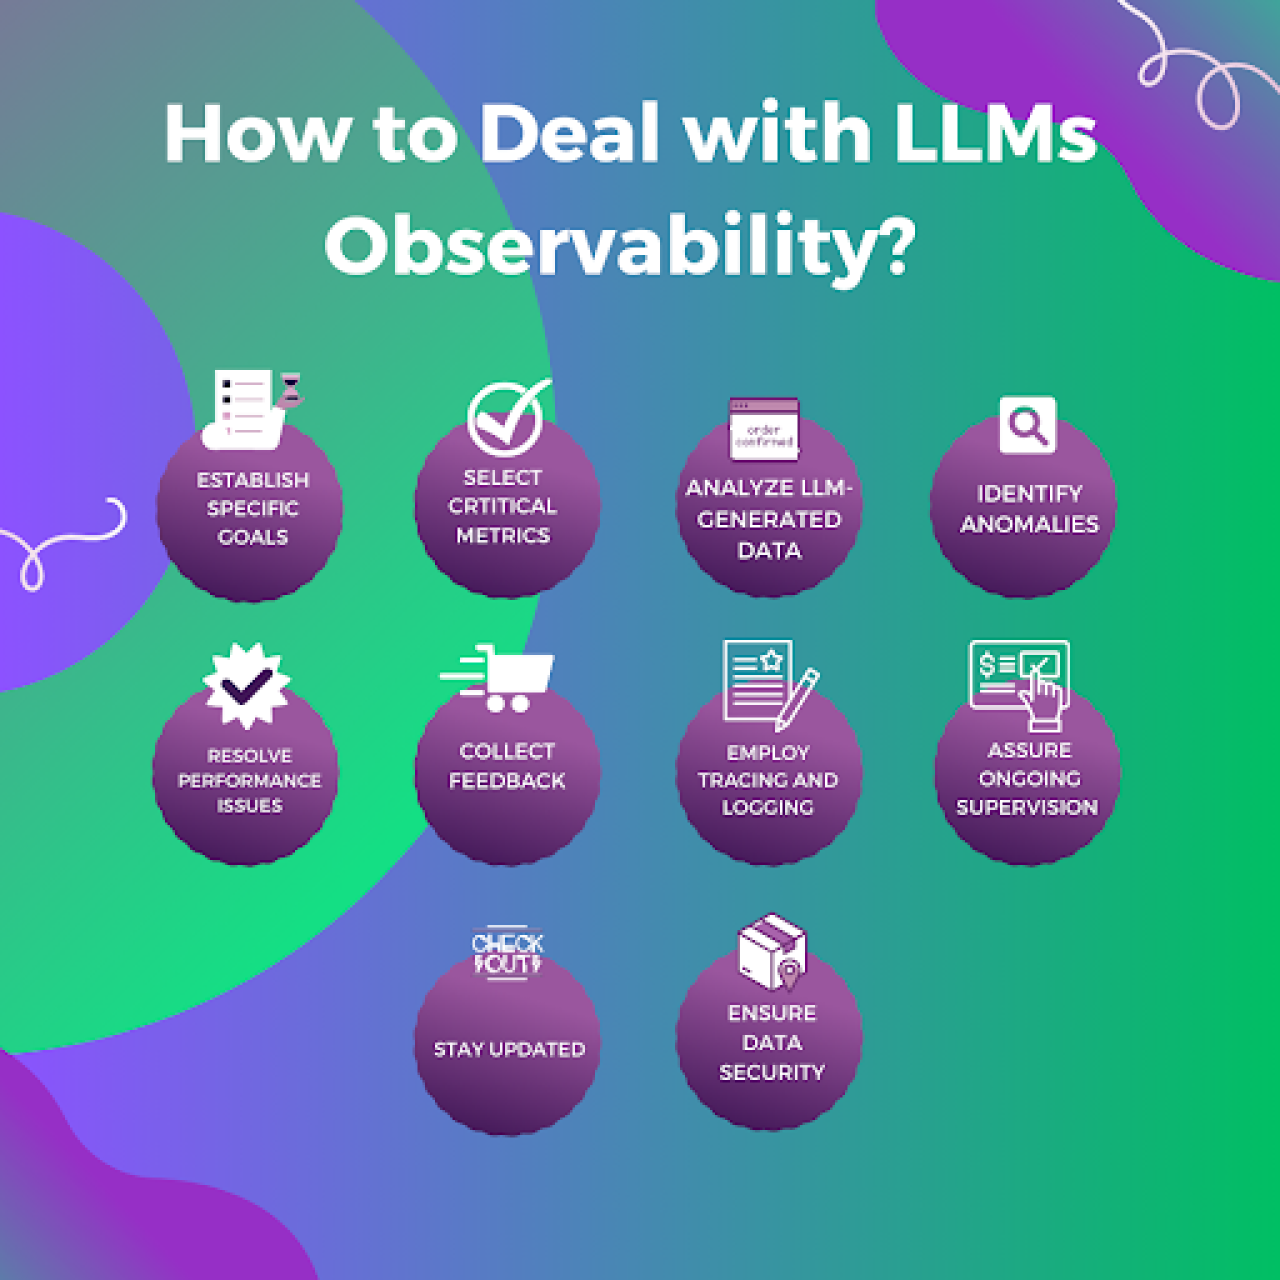 How to Deal With LLMs Observability.